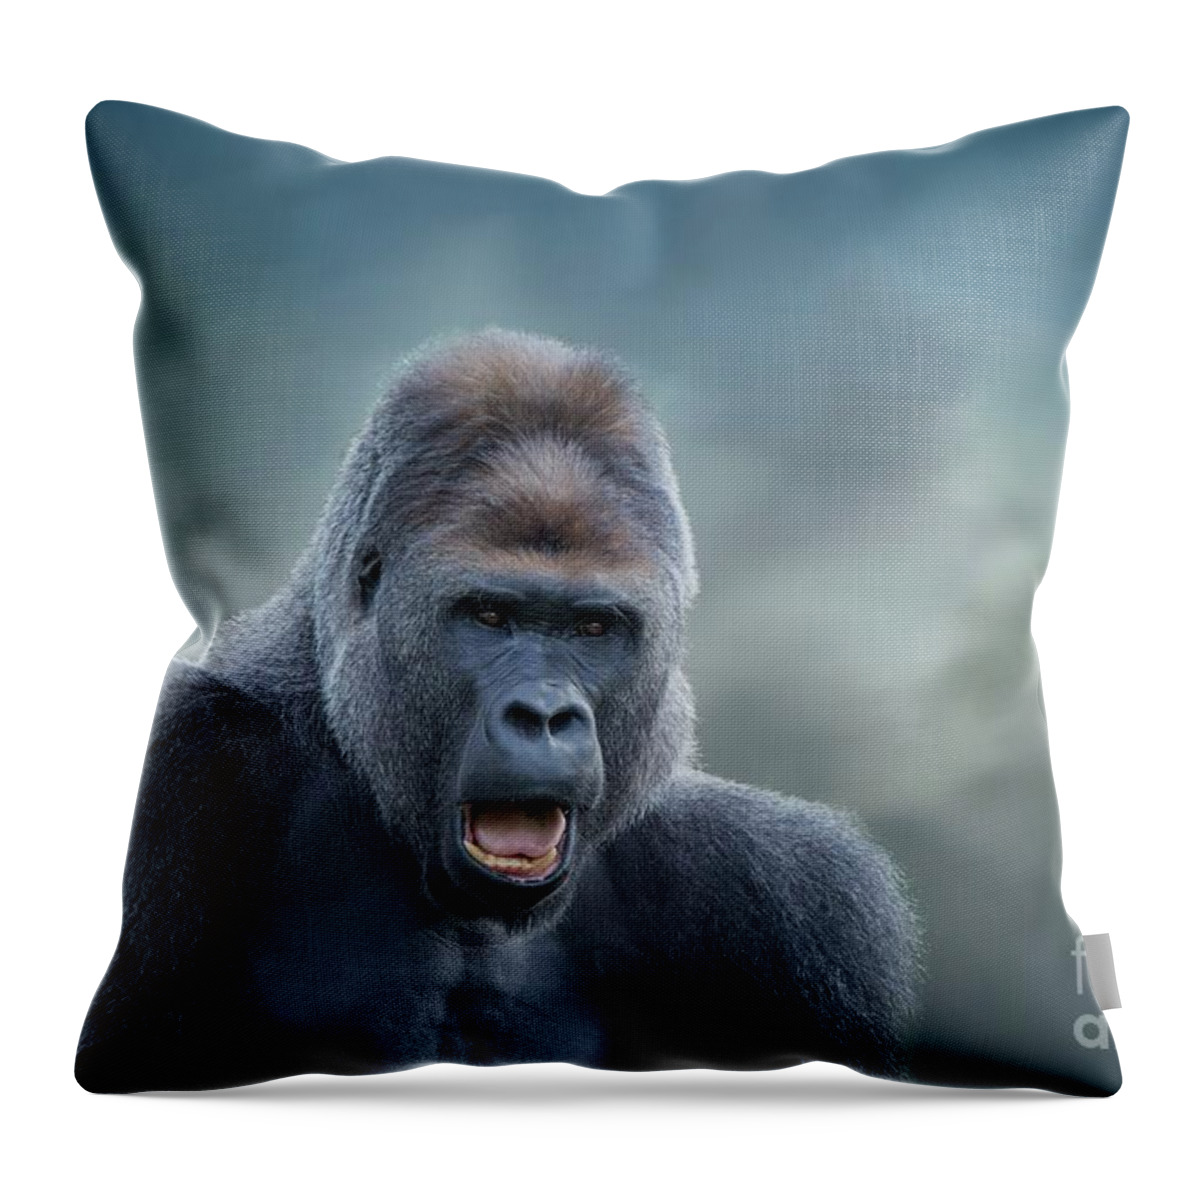 Gorilla Throw Pillow featuring the photograph Angry by Eva Lechner